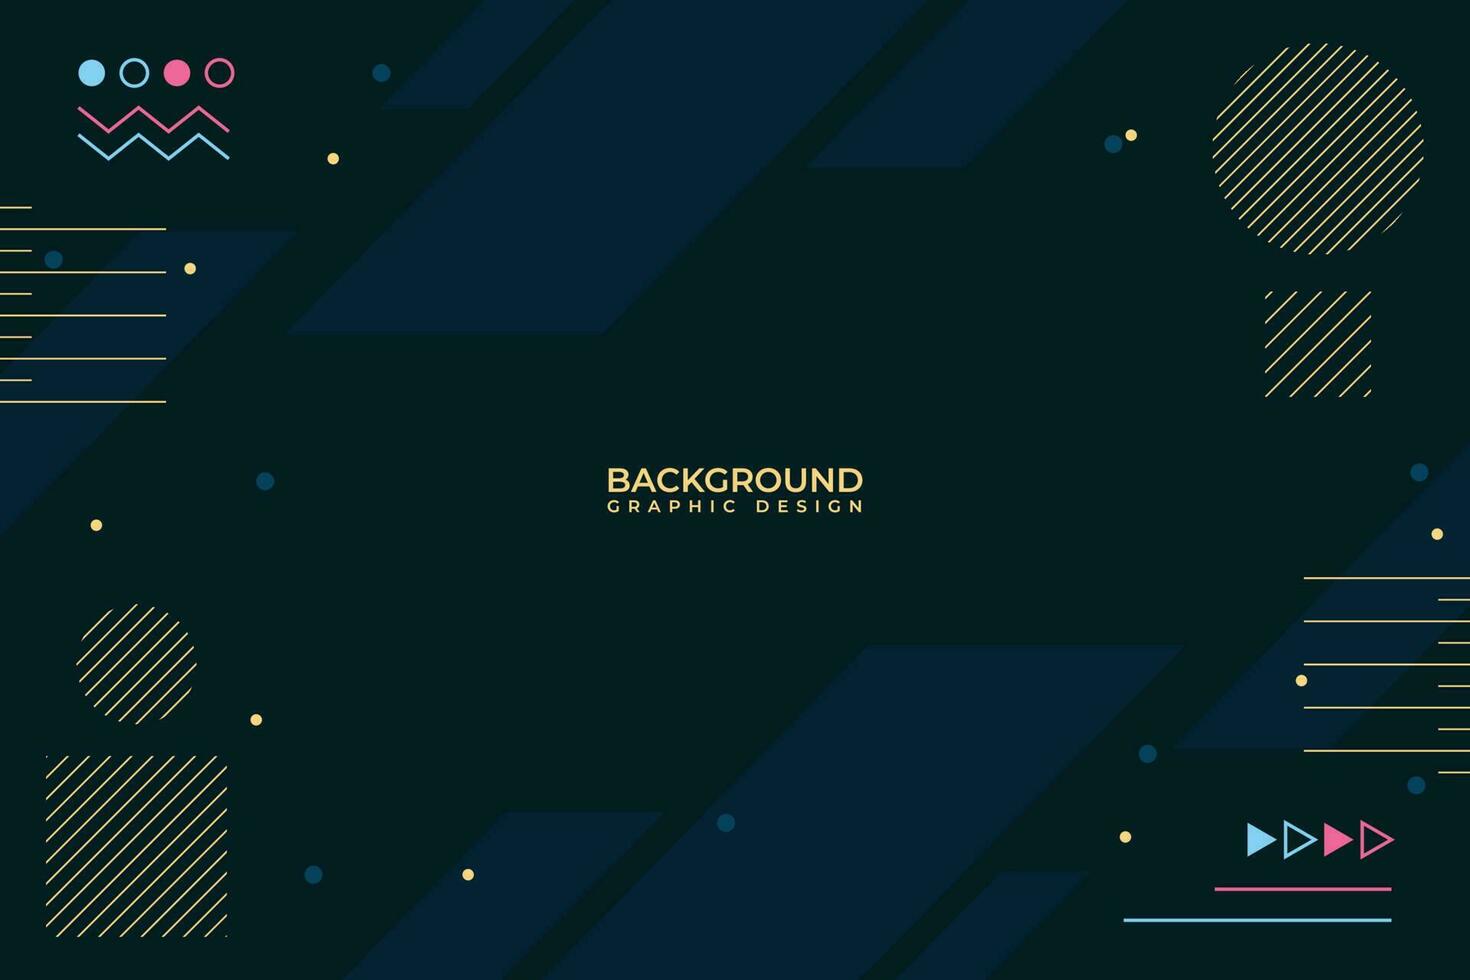 Modern and futuristic of universe background design template. Vector illustration